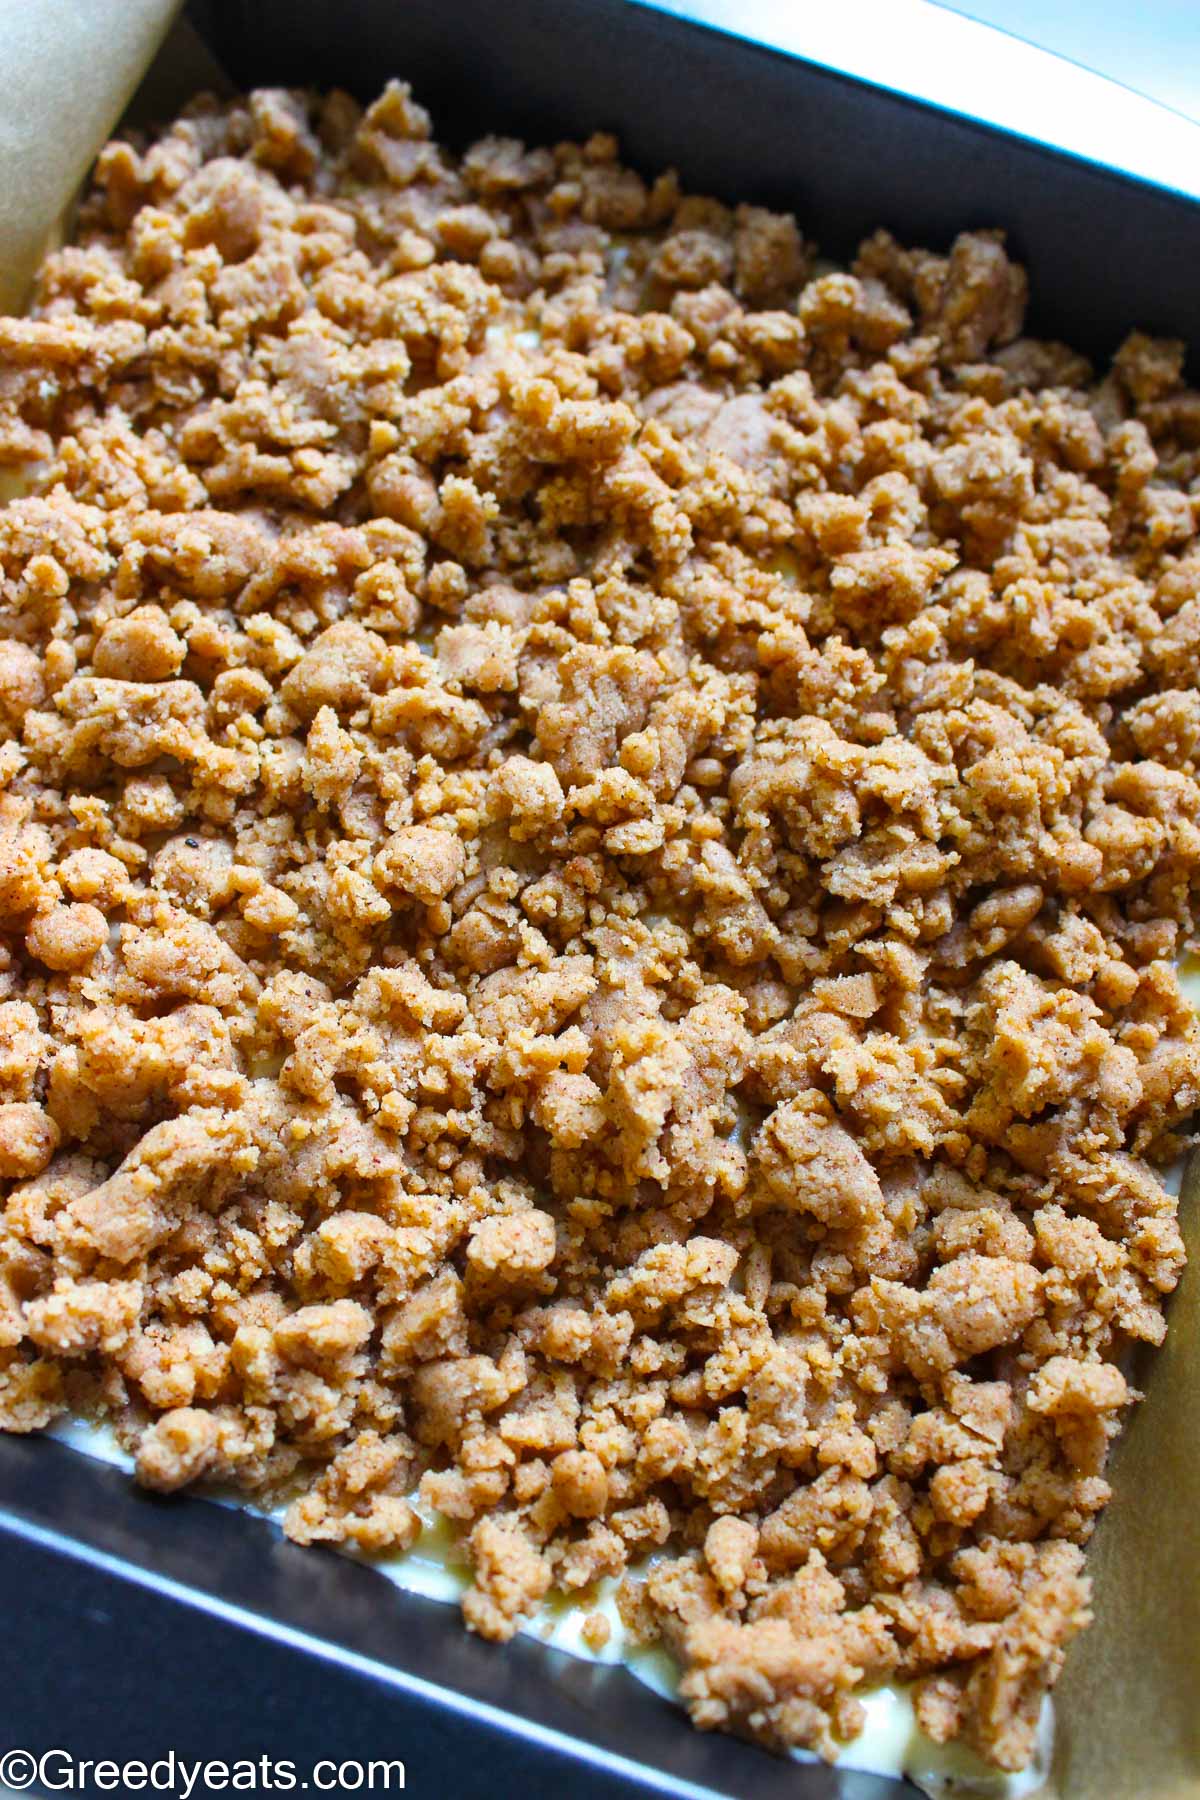 Homemade soft, thick and crumbly streusel topping for coffee cake.